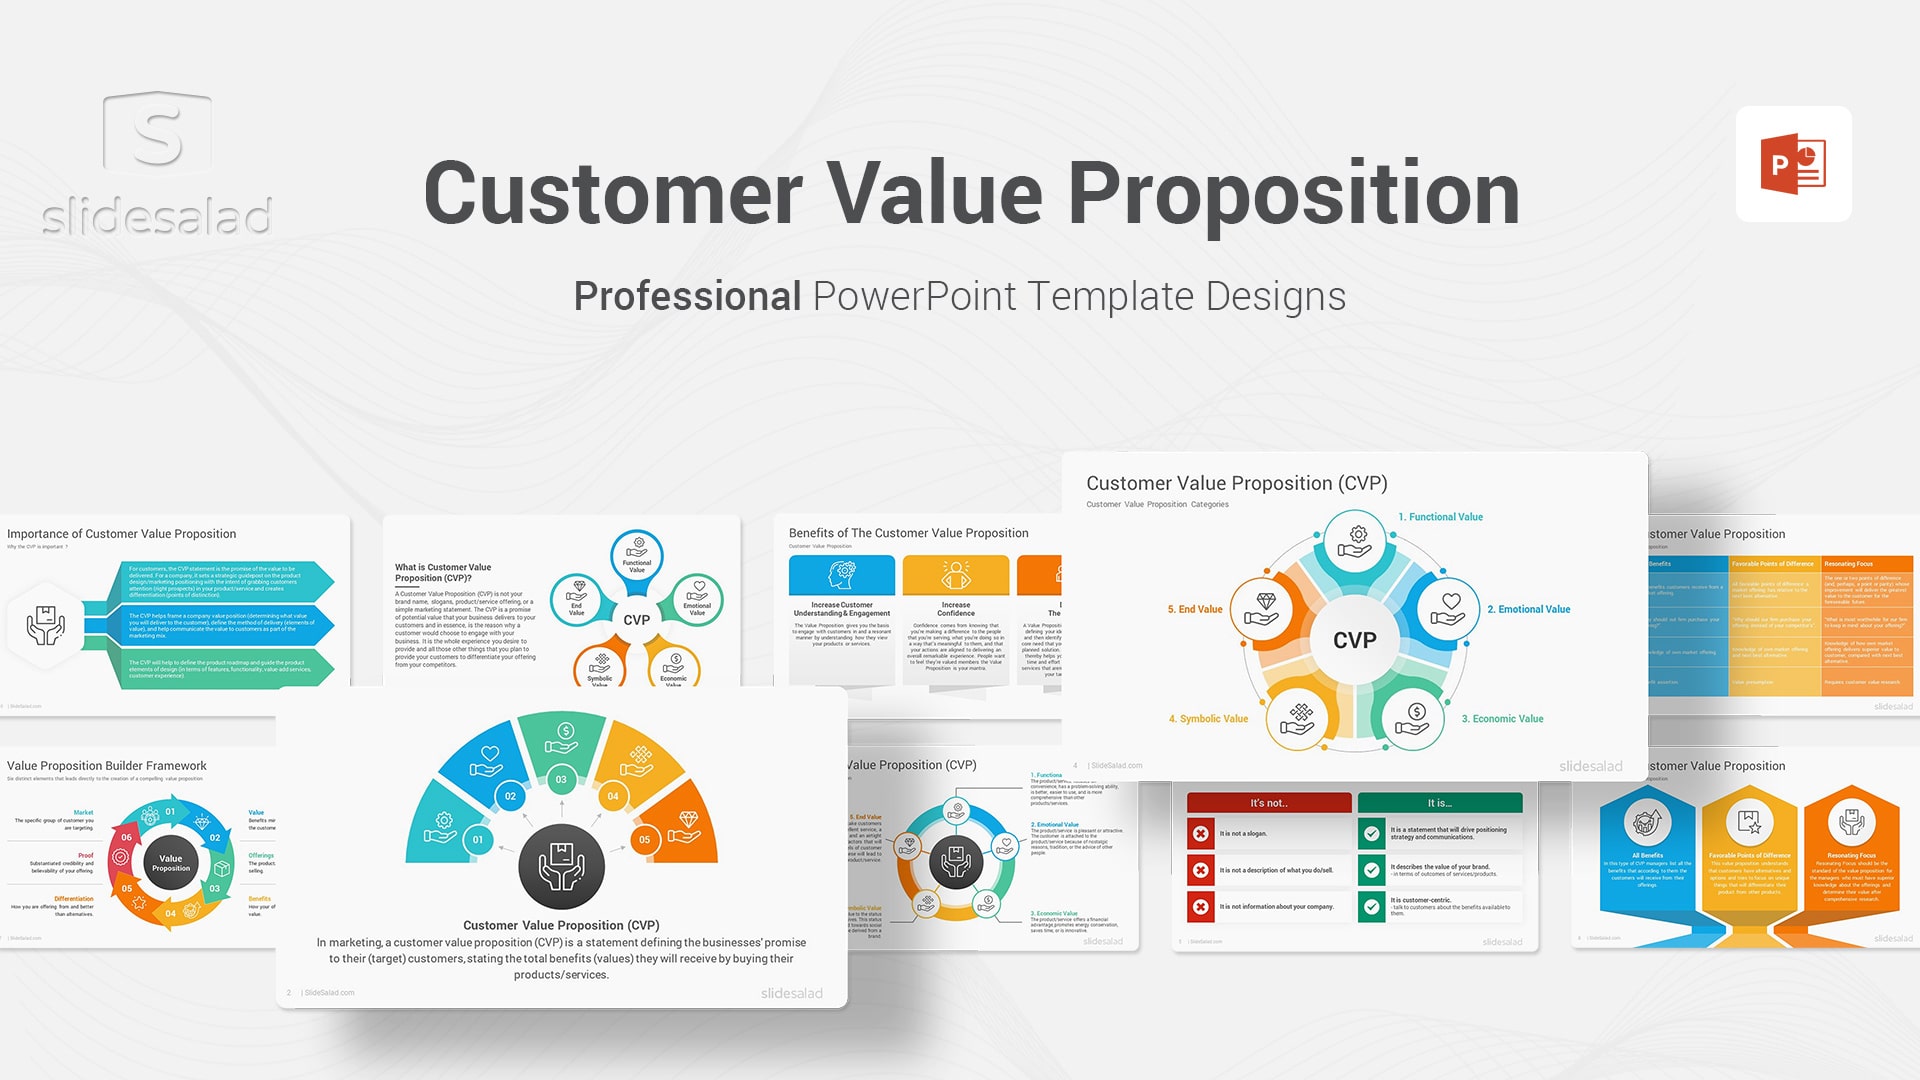 Customer Value Proposition PowerPoint Template - Elegant Business or Marketing Statement PPT Template for Products and Services